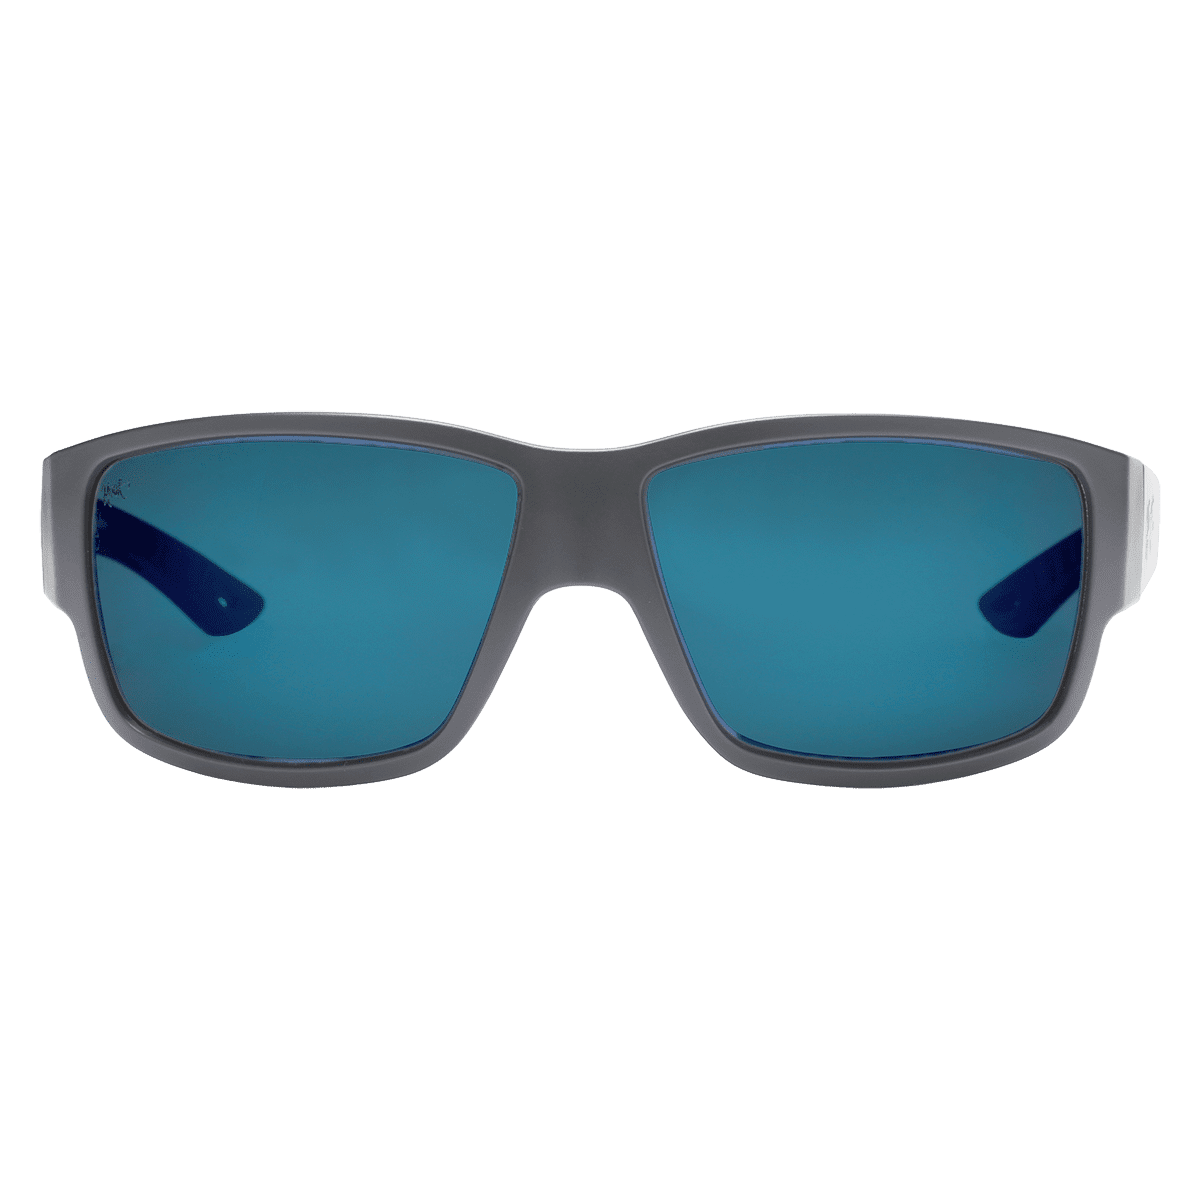 protect your eyes from harmful UV rays with the Hook optics last call polarized sunglass